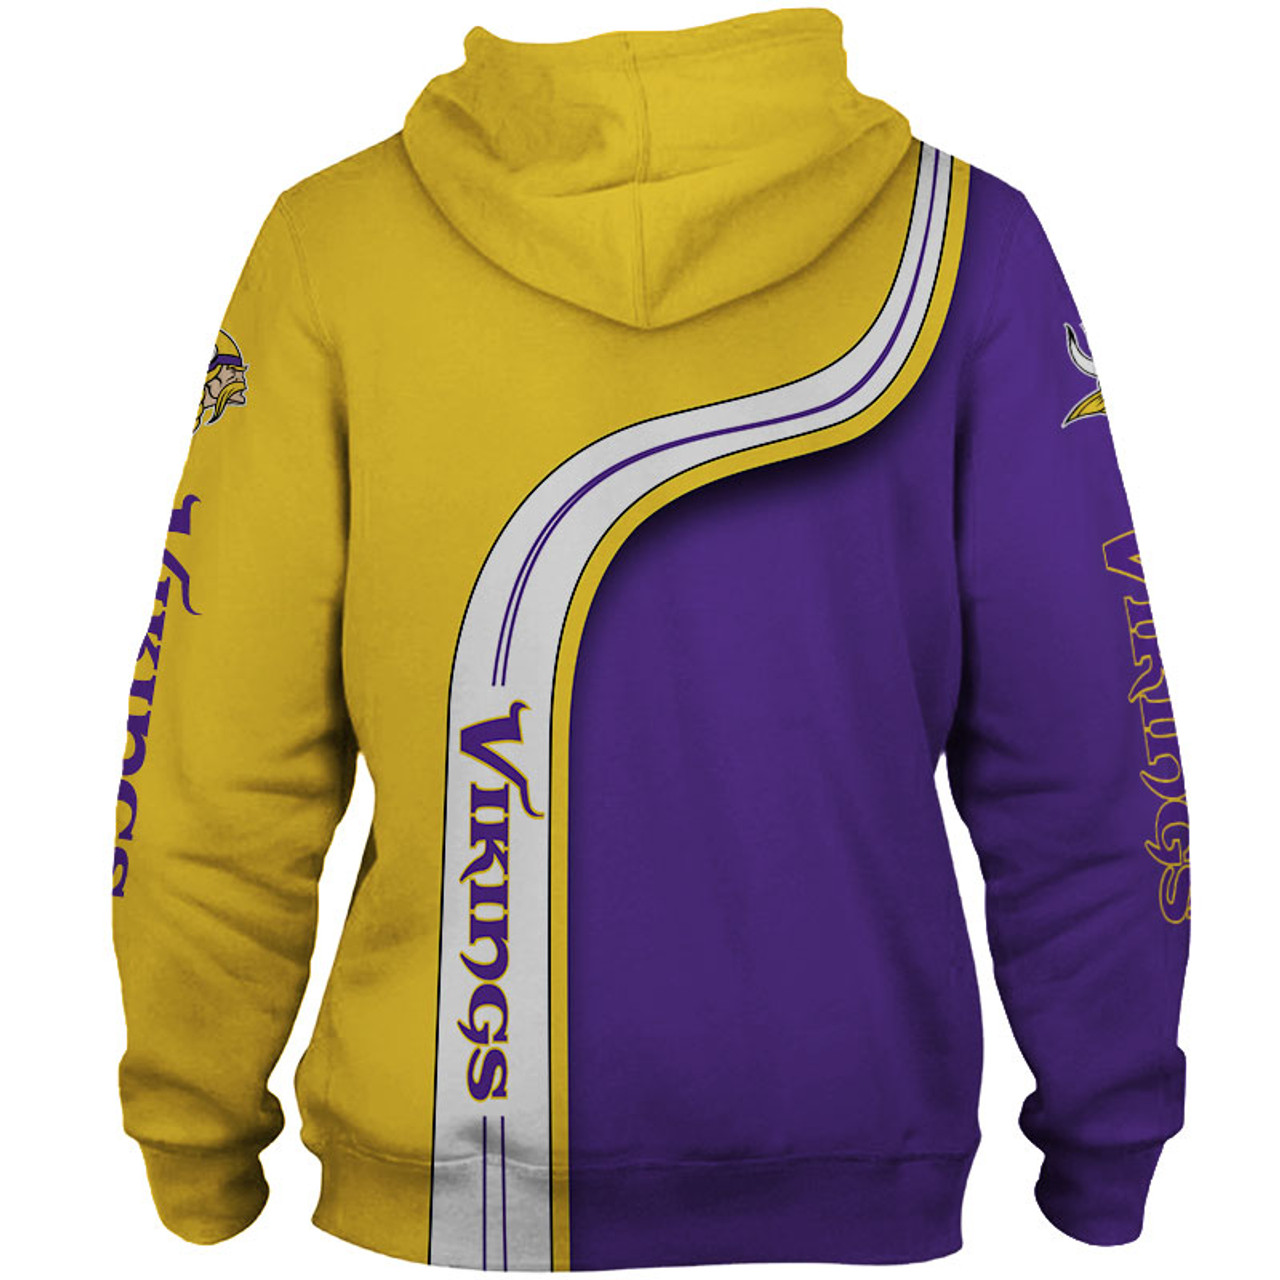 **(OFFICIAL-N.F.L.MINNESOTA-VIKINGS-FASHION-PULLOVER-TEAM-HOODIES/CUSTOM-3D-GRAPHIC-PRINTED-DETAILED-DOUBLE-SIDED-DESIGN/CLASSIC-OFFICIAL-VIKINGS-TEAM-LOGOS & OFFICIAL-VIKINGS-TEAM-COLORS/WARM-PREMIUM-OFFICIAL-N.F.L.VIKINGS-TEAM-FAN-PULLOVER-HOODIES)**